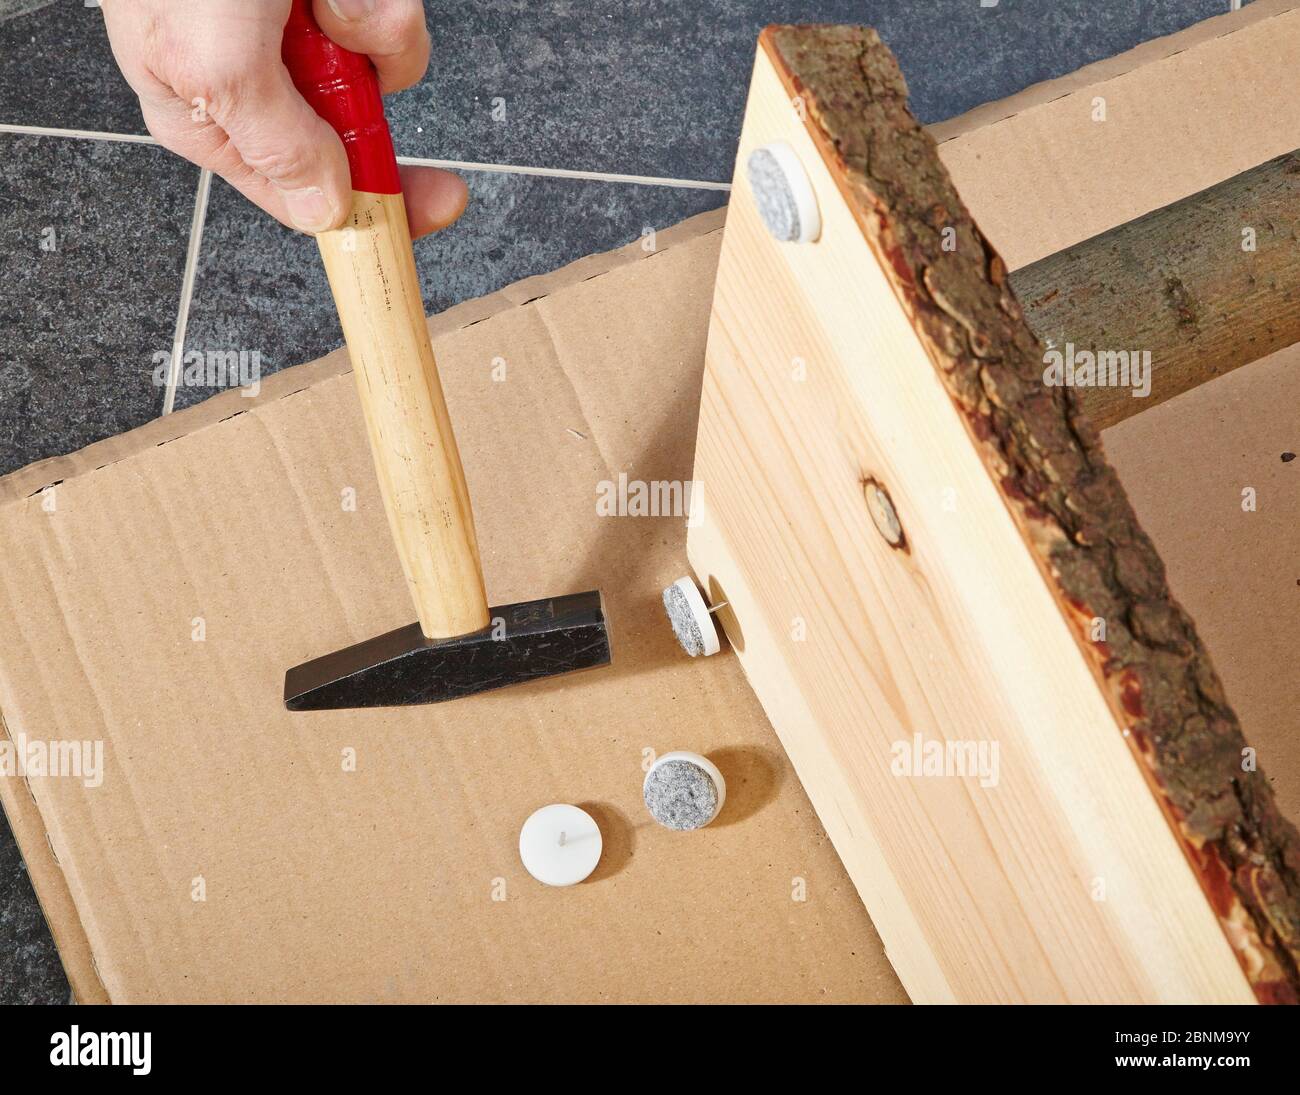 Construction of a wooden shelf, do-it-yourself production, step-by-step, step 13 Attaching felt pads to protect the floor and to prevent the shelf from wobbling Stock Photo